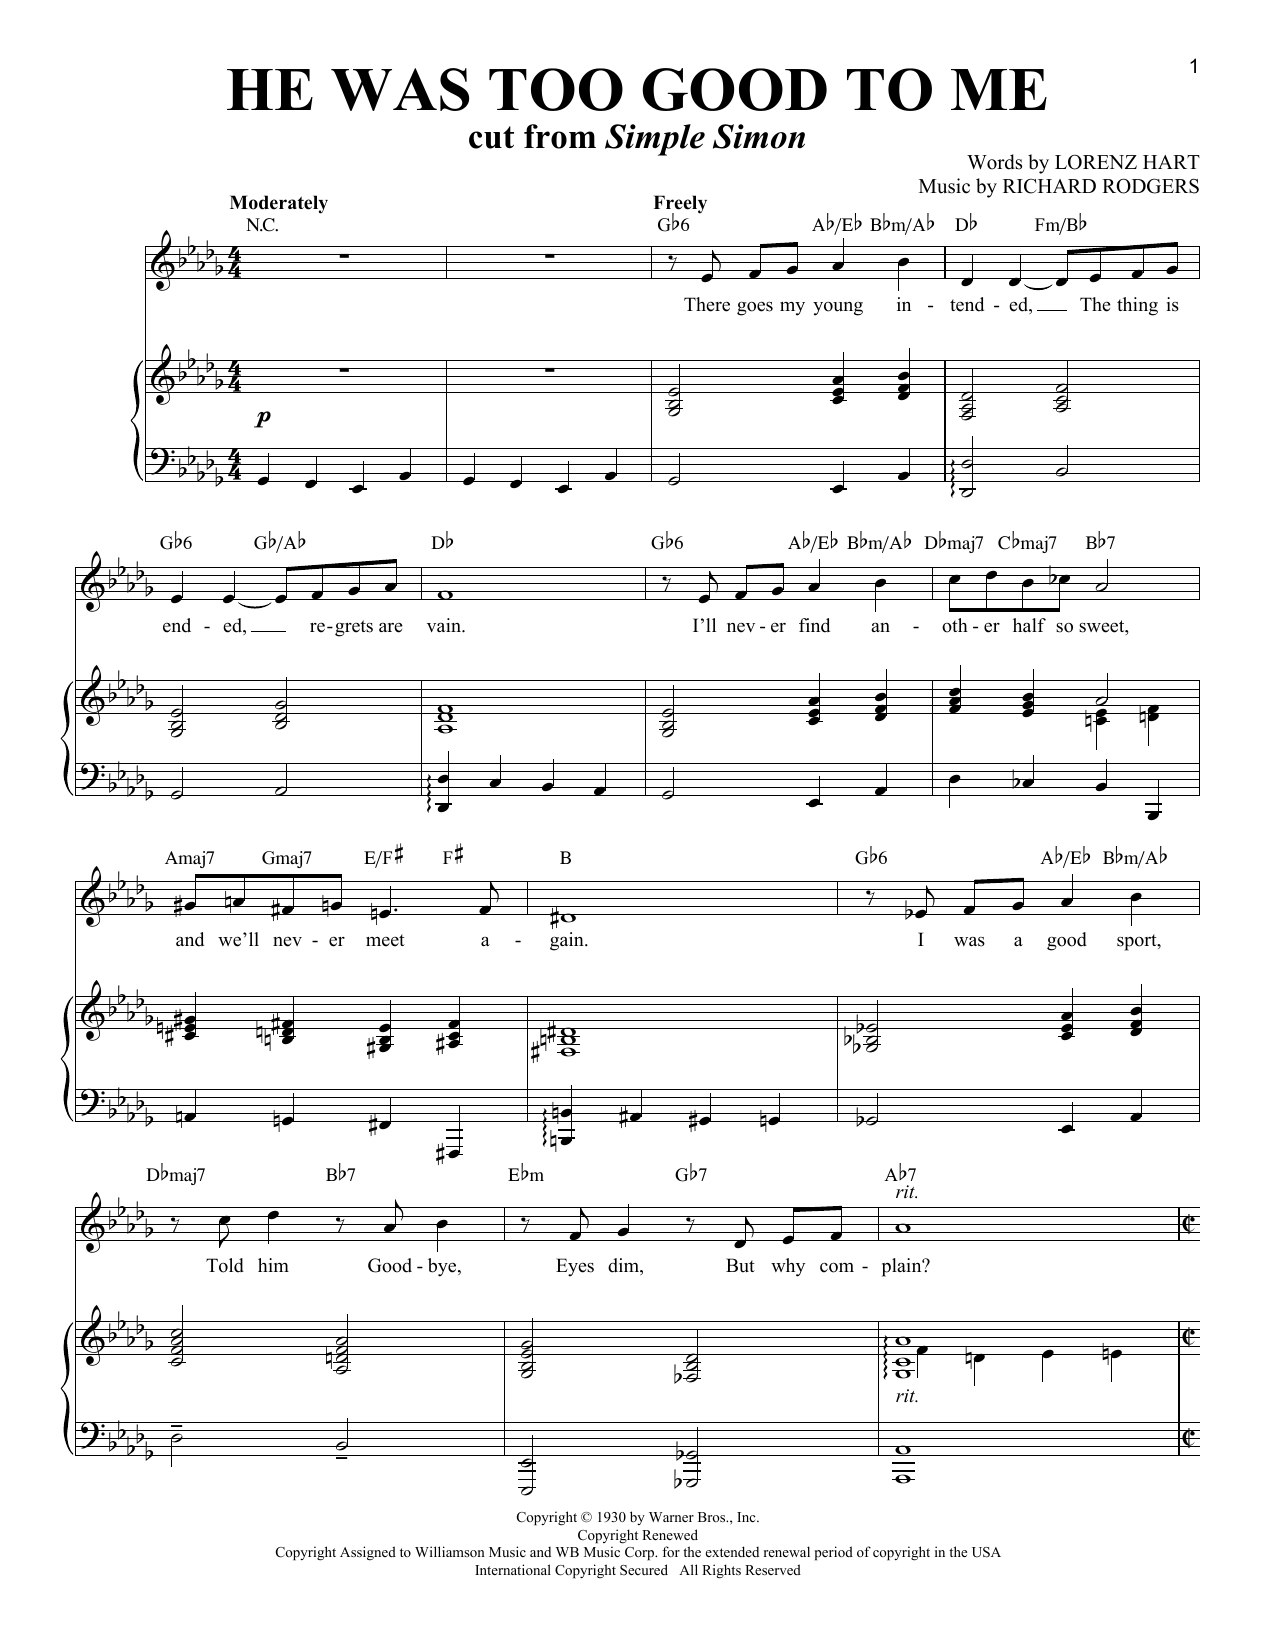 Download Rodgers & Hart He Was Too Good To Me Sheet Music